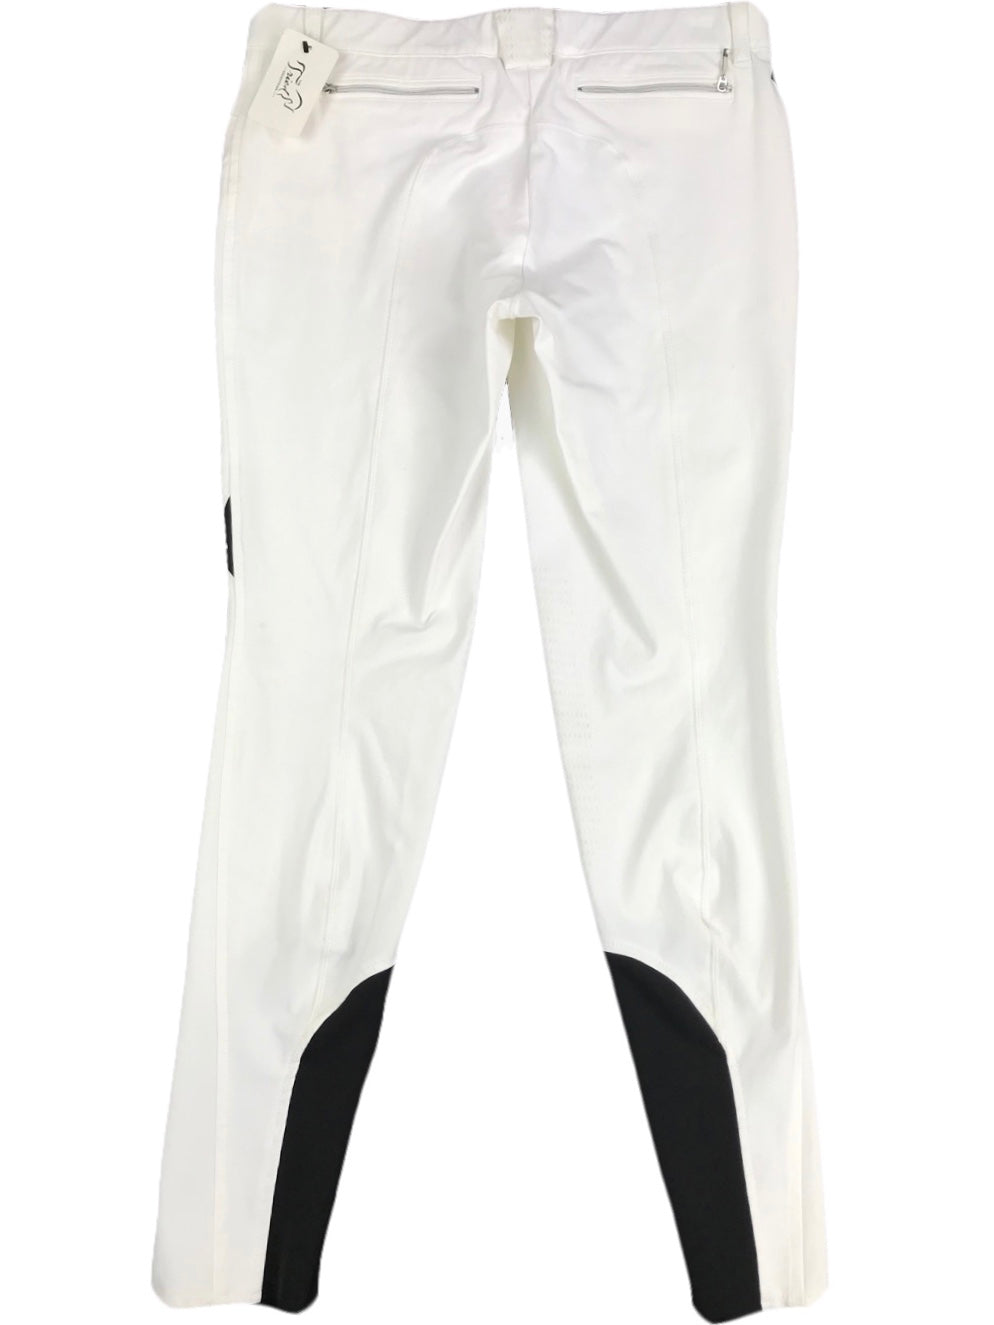 Back of Equiline 'Ash Lite Schoeller' Breeches in White - Women's IT 40 (US 26)